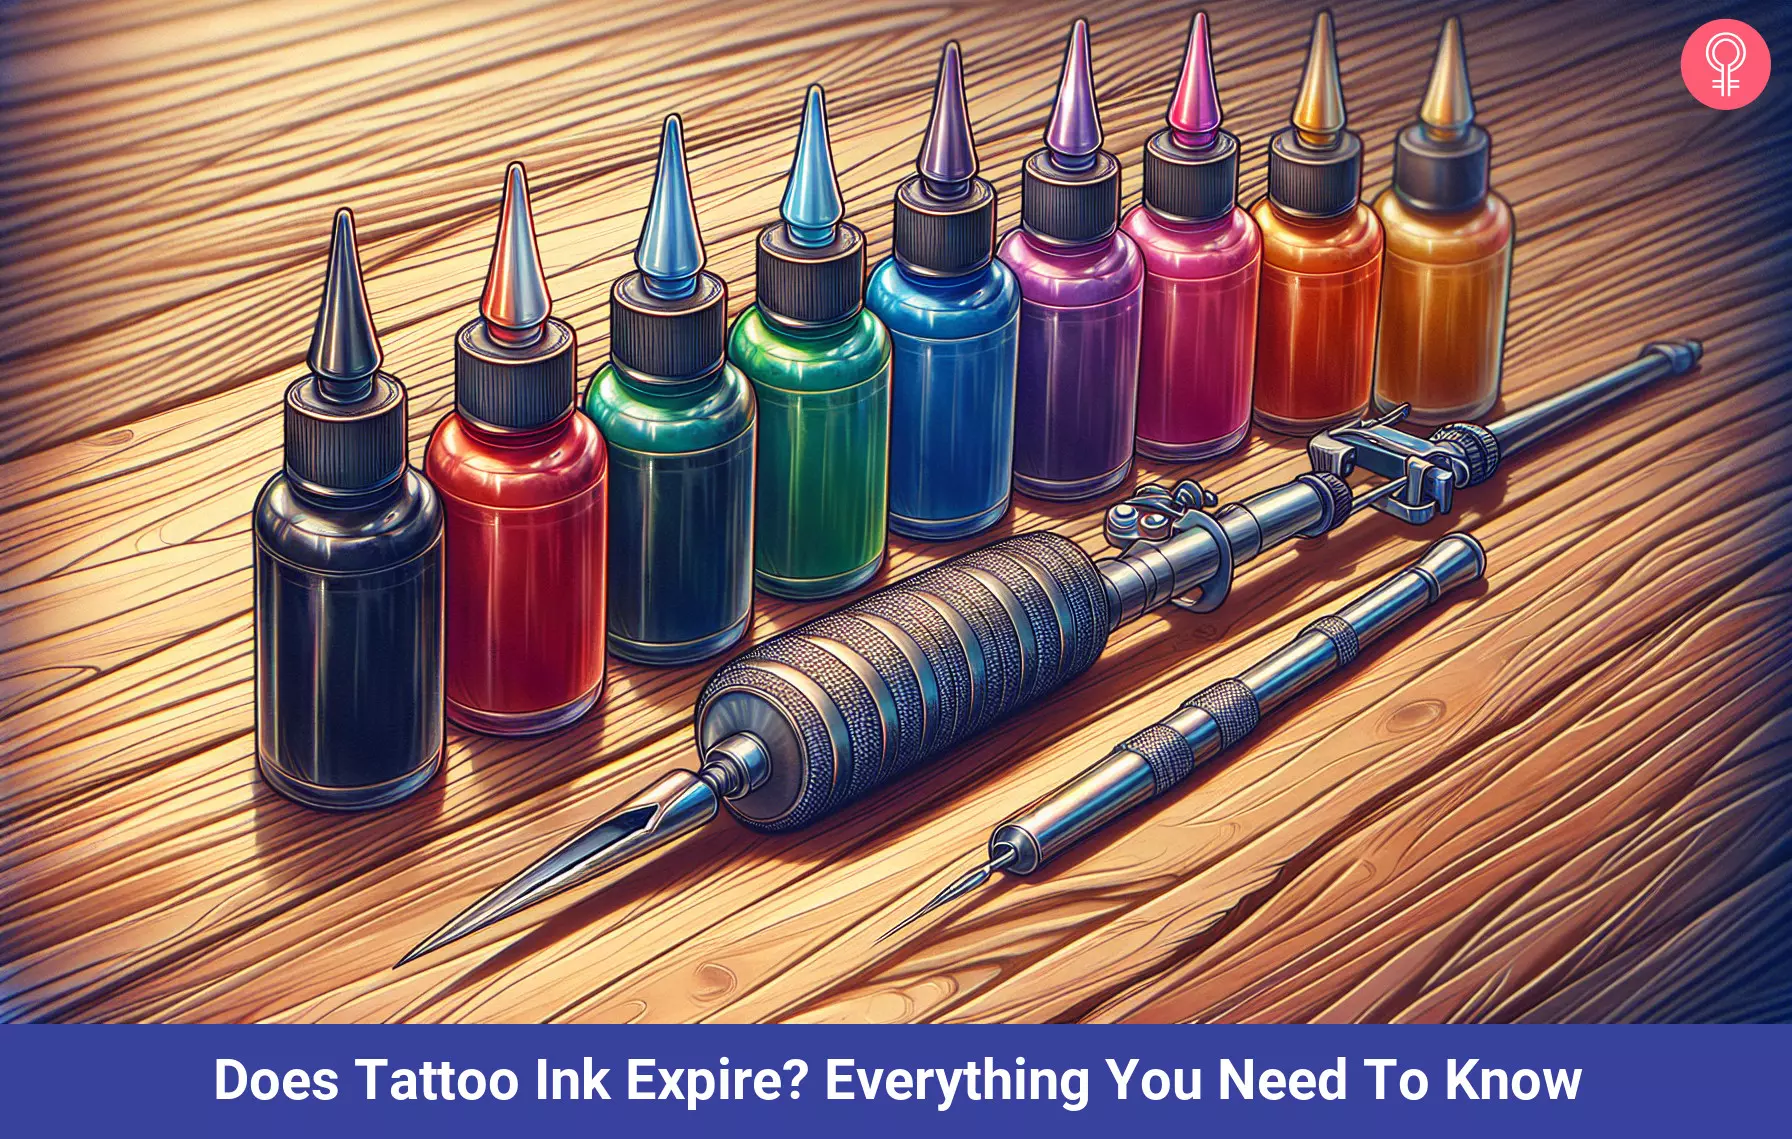 Does Tattoo Ink Expire?: Everything You Need To Know